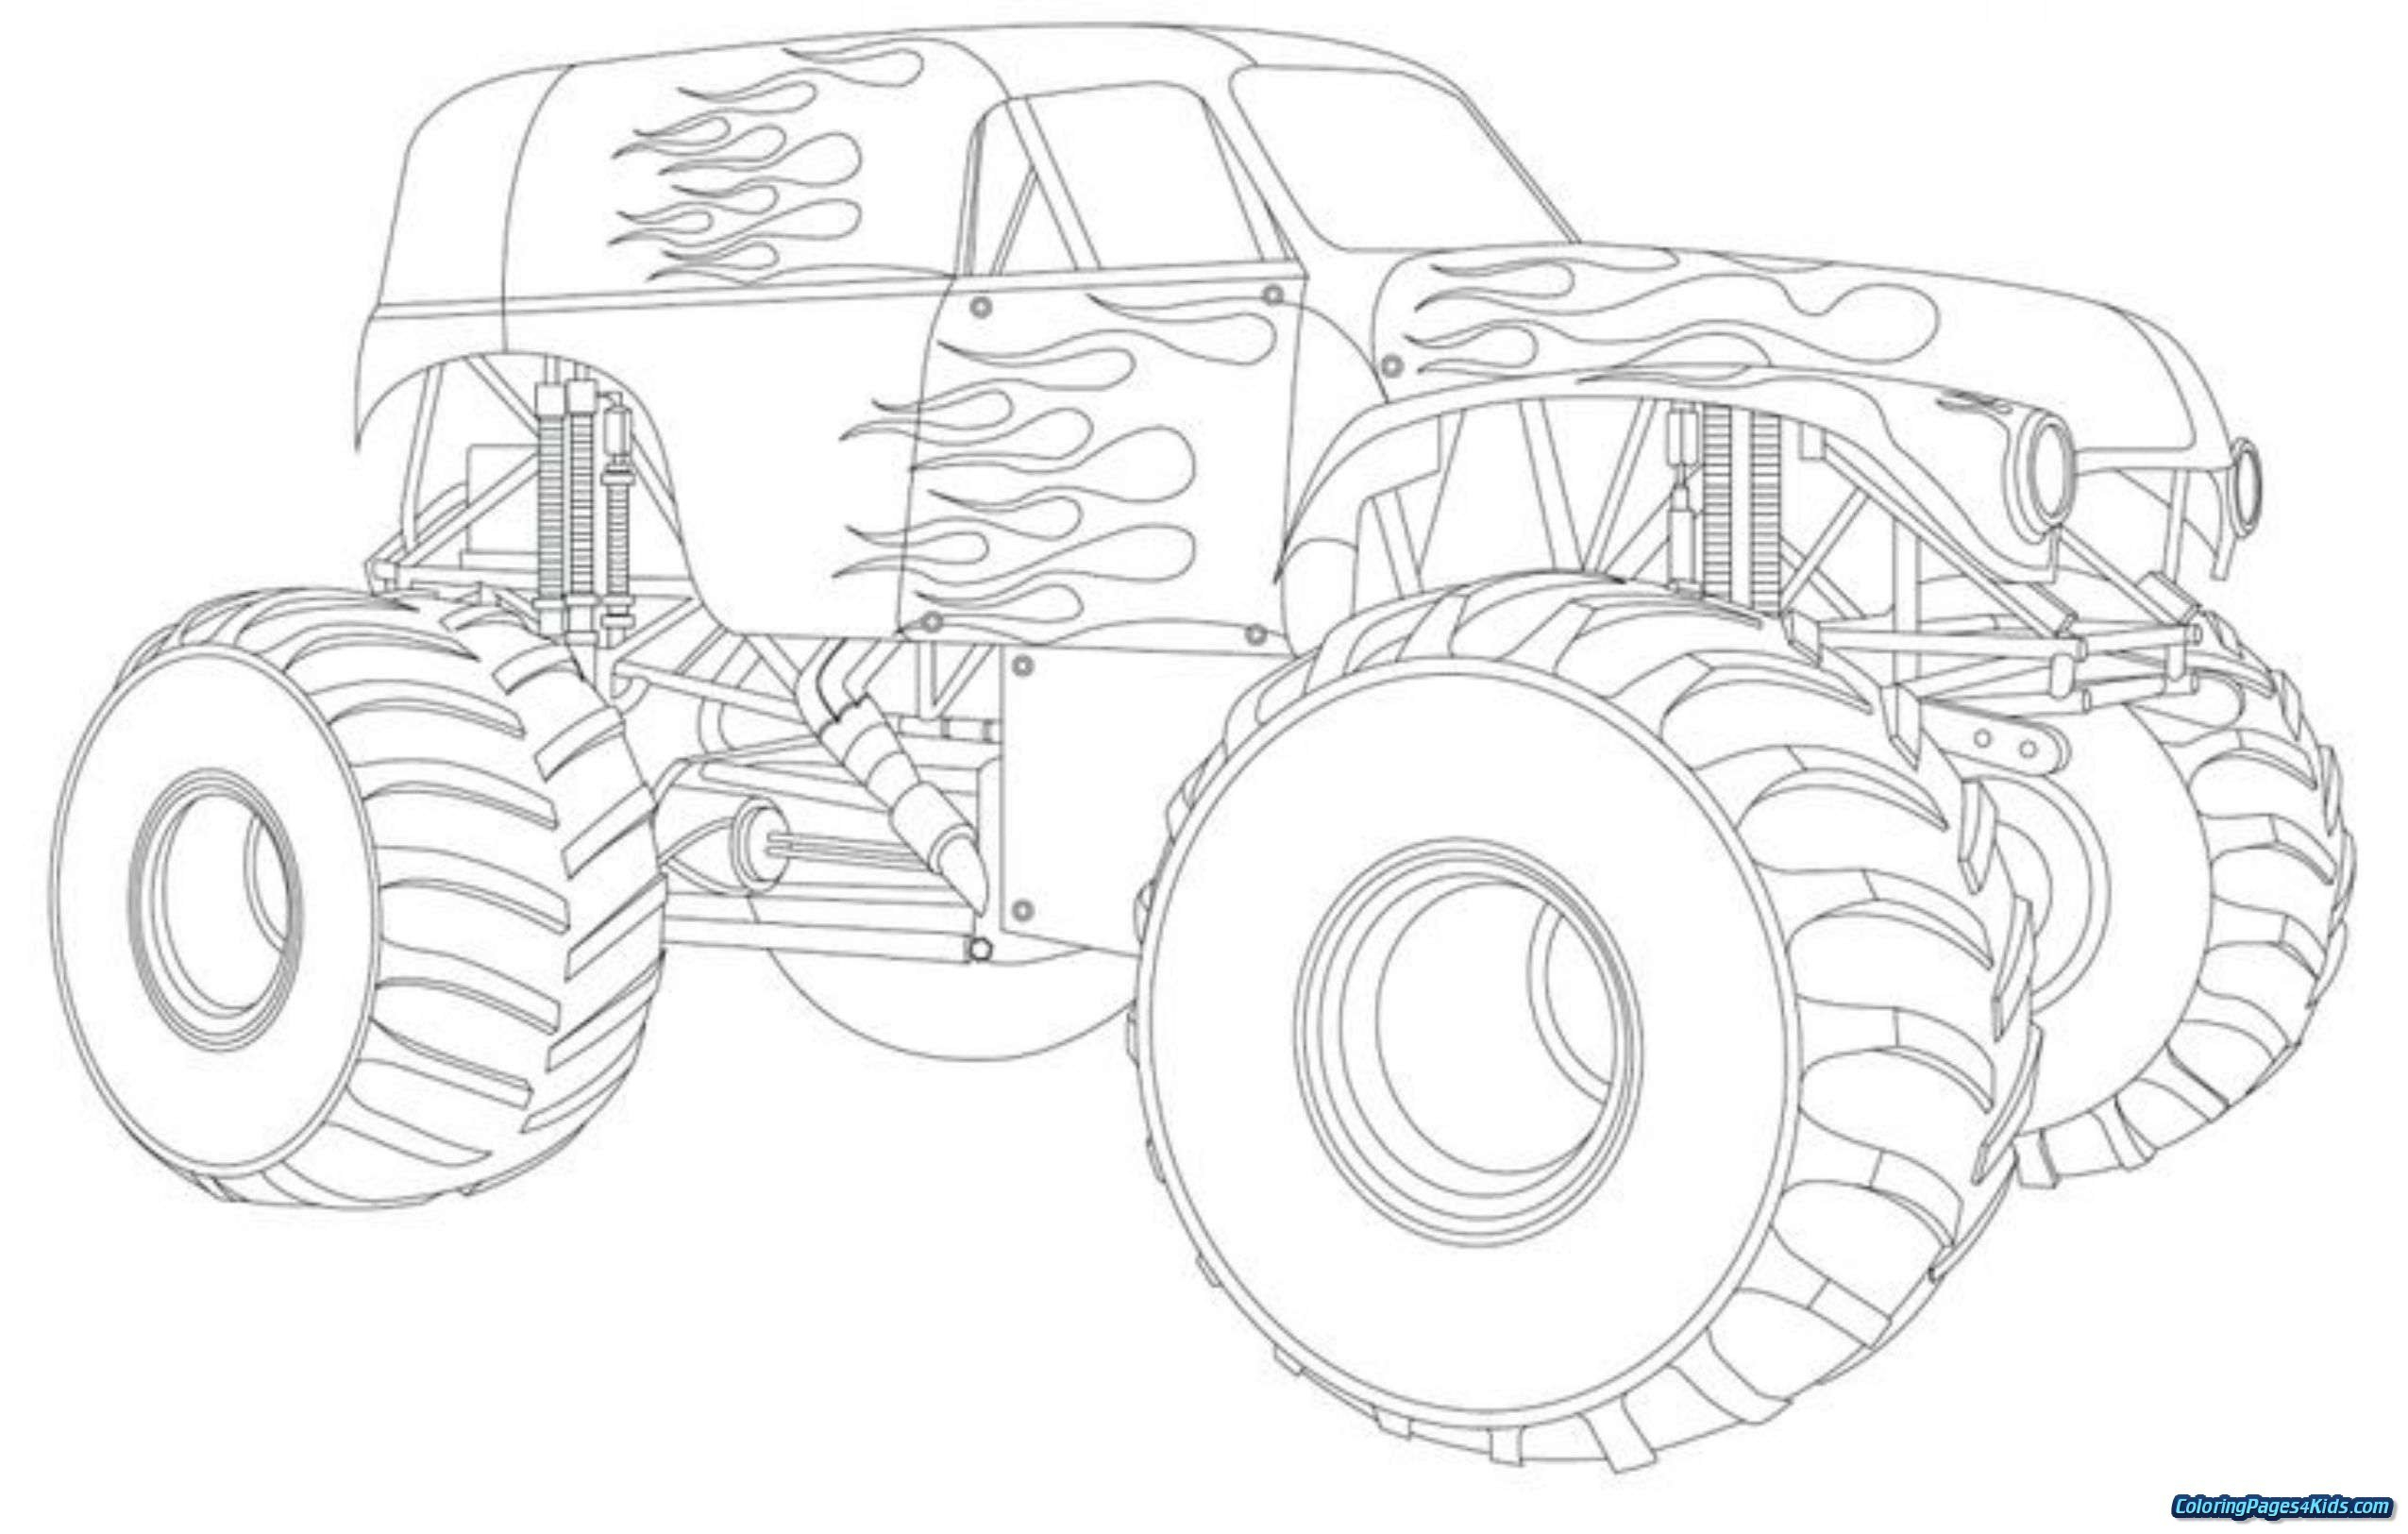 Monster Truck Coloring Pages Coloring Pages Stunning Monster Trucks Coloring Pages Image Ideas